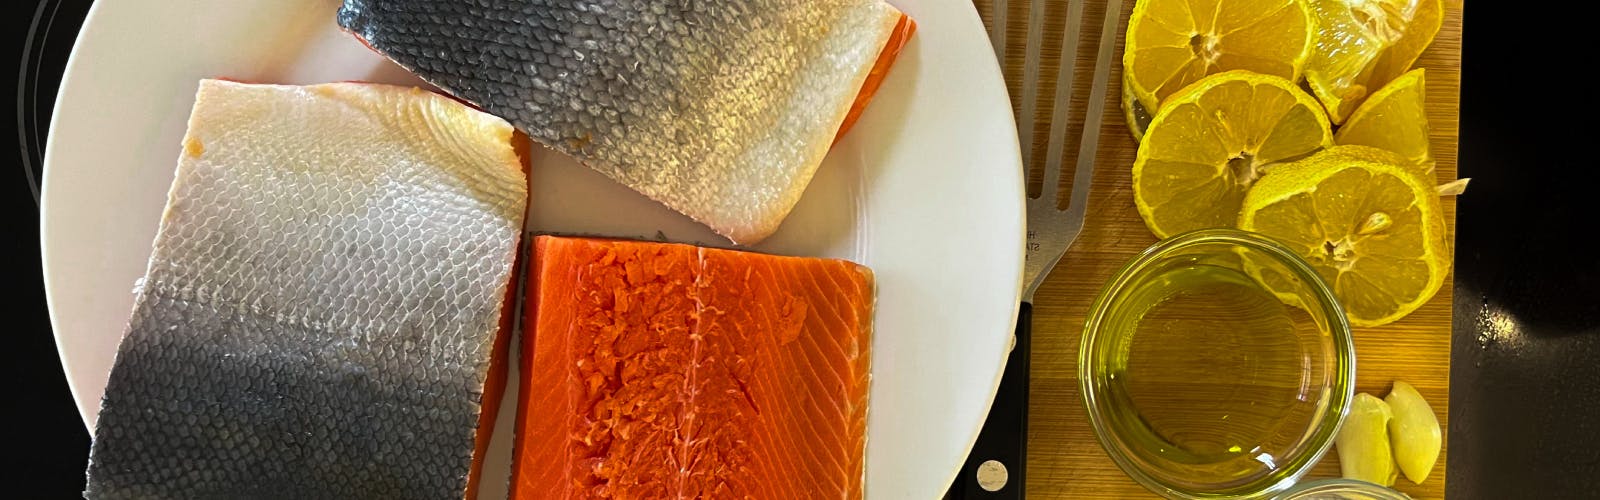 Raw salmon fillets on a plate